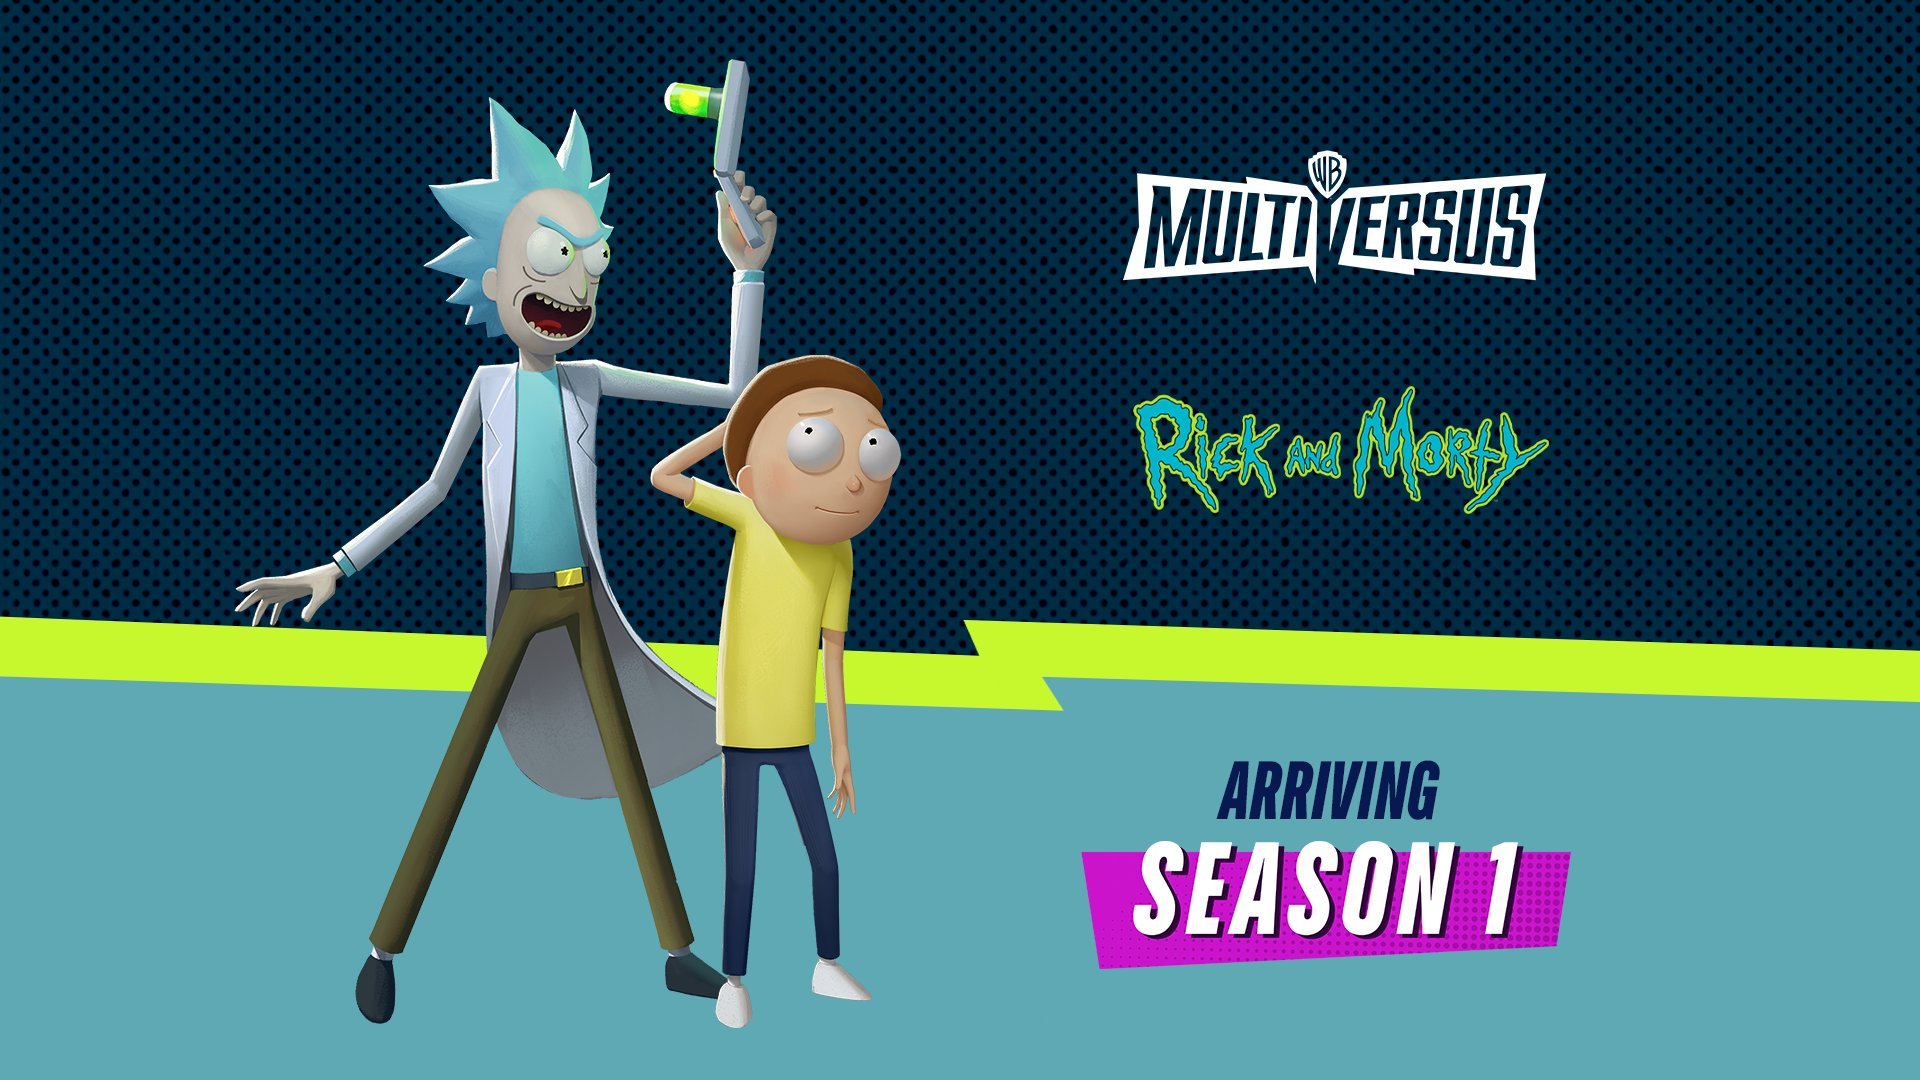 MultiVersus do Lebron and Rick & Morty have in common? They're both joining #MultiVersus! Lebron swings in July 26th, and Rick & Morty arrive in Season 1. #SDCC